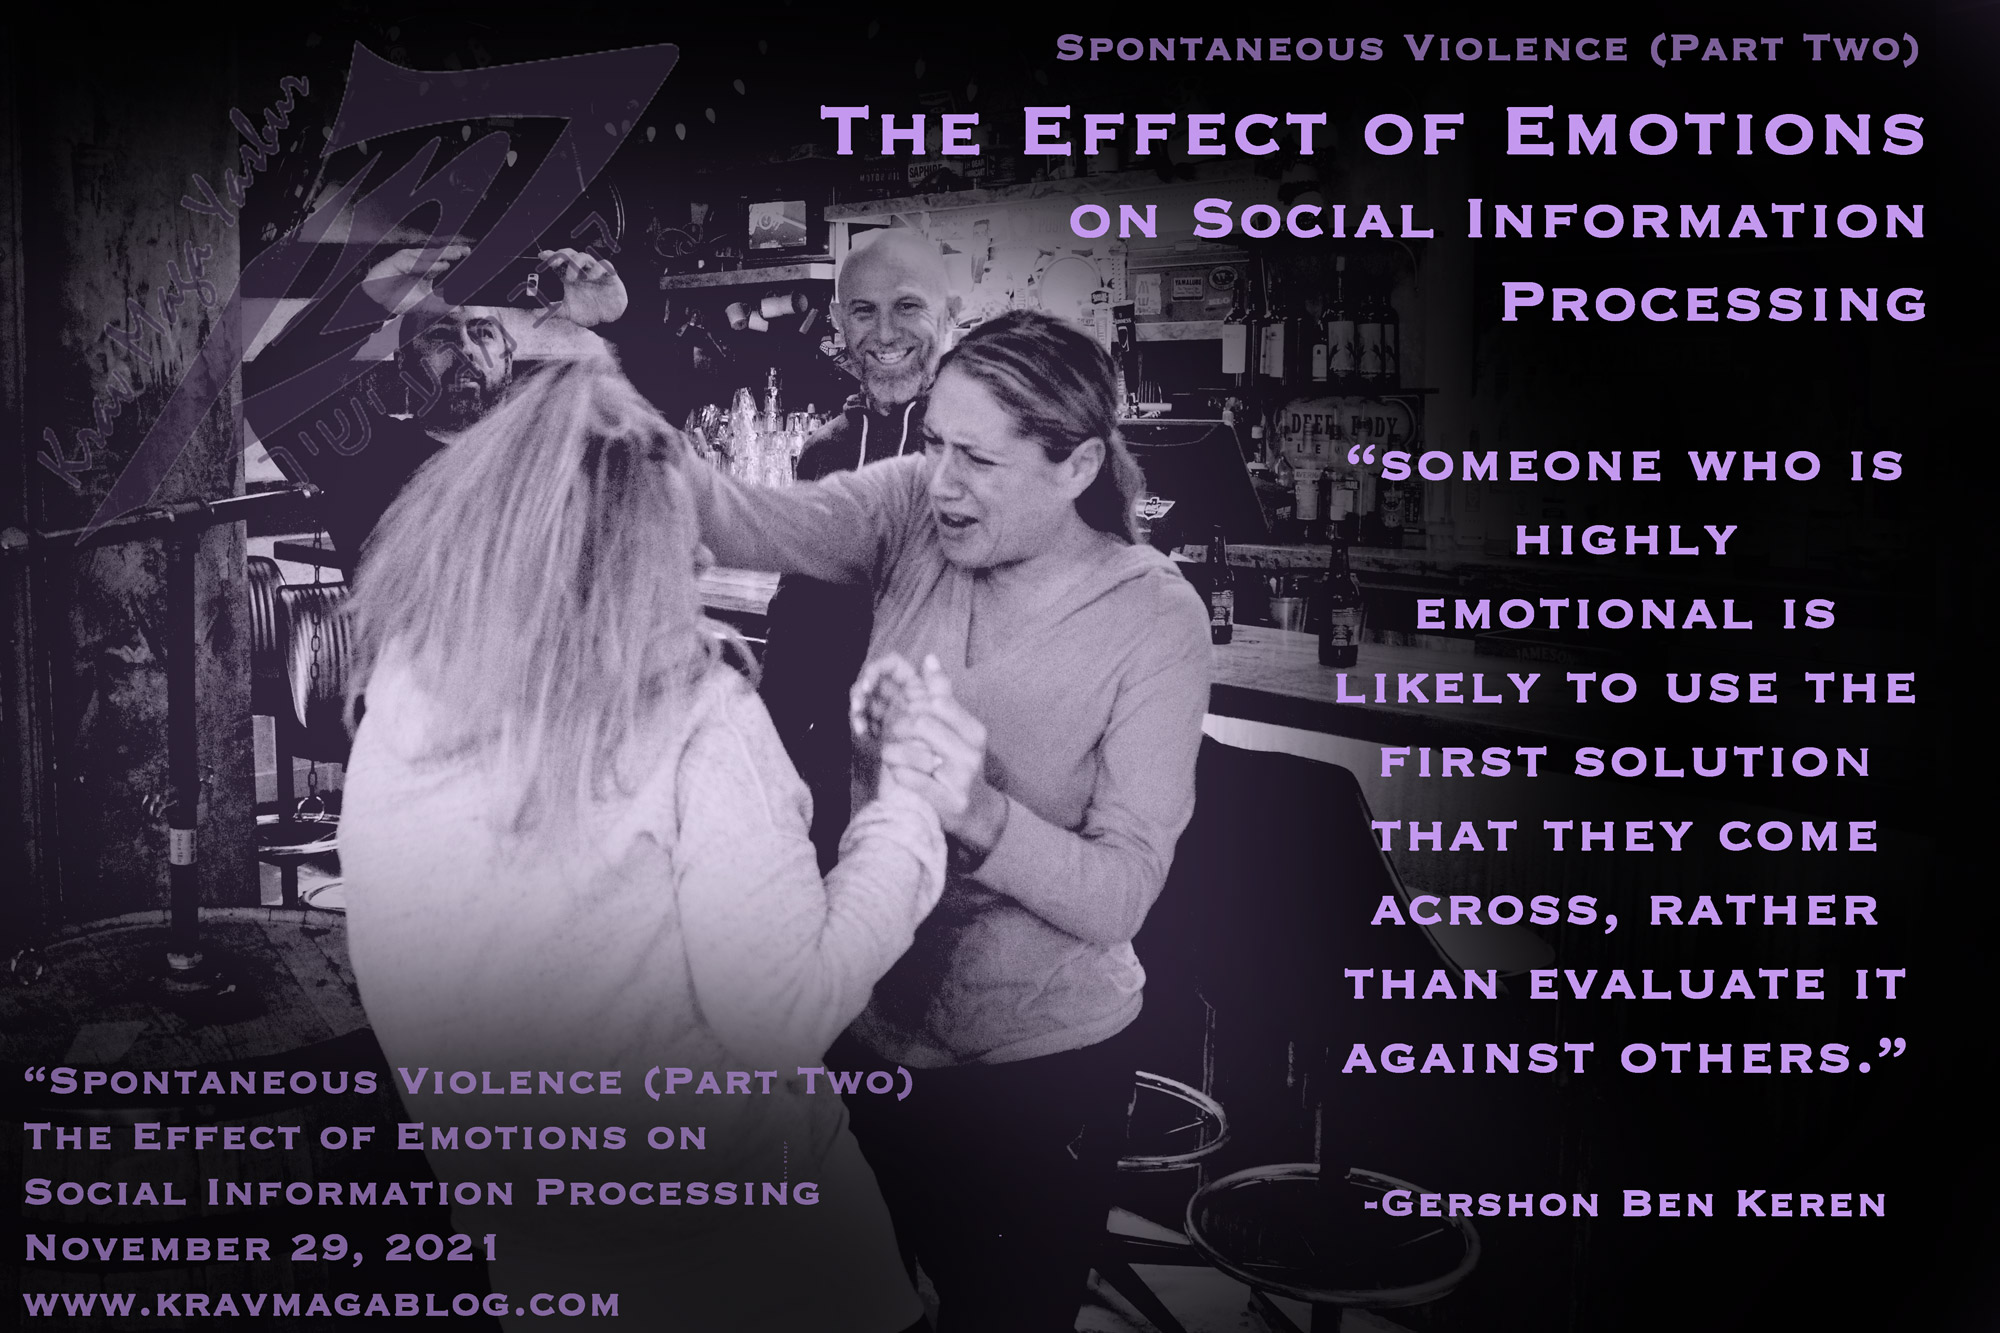 Blog About Effects of Emotions on Social Information Processing